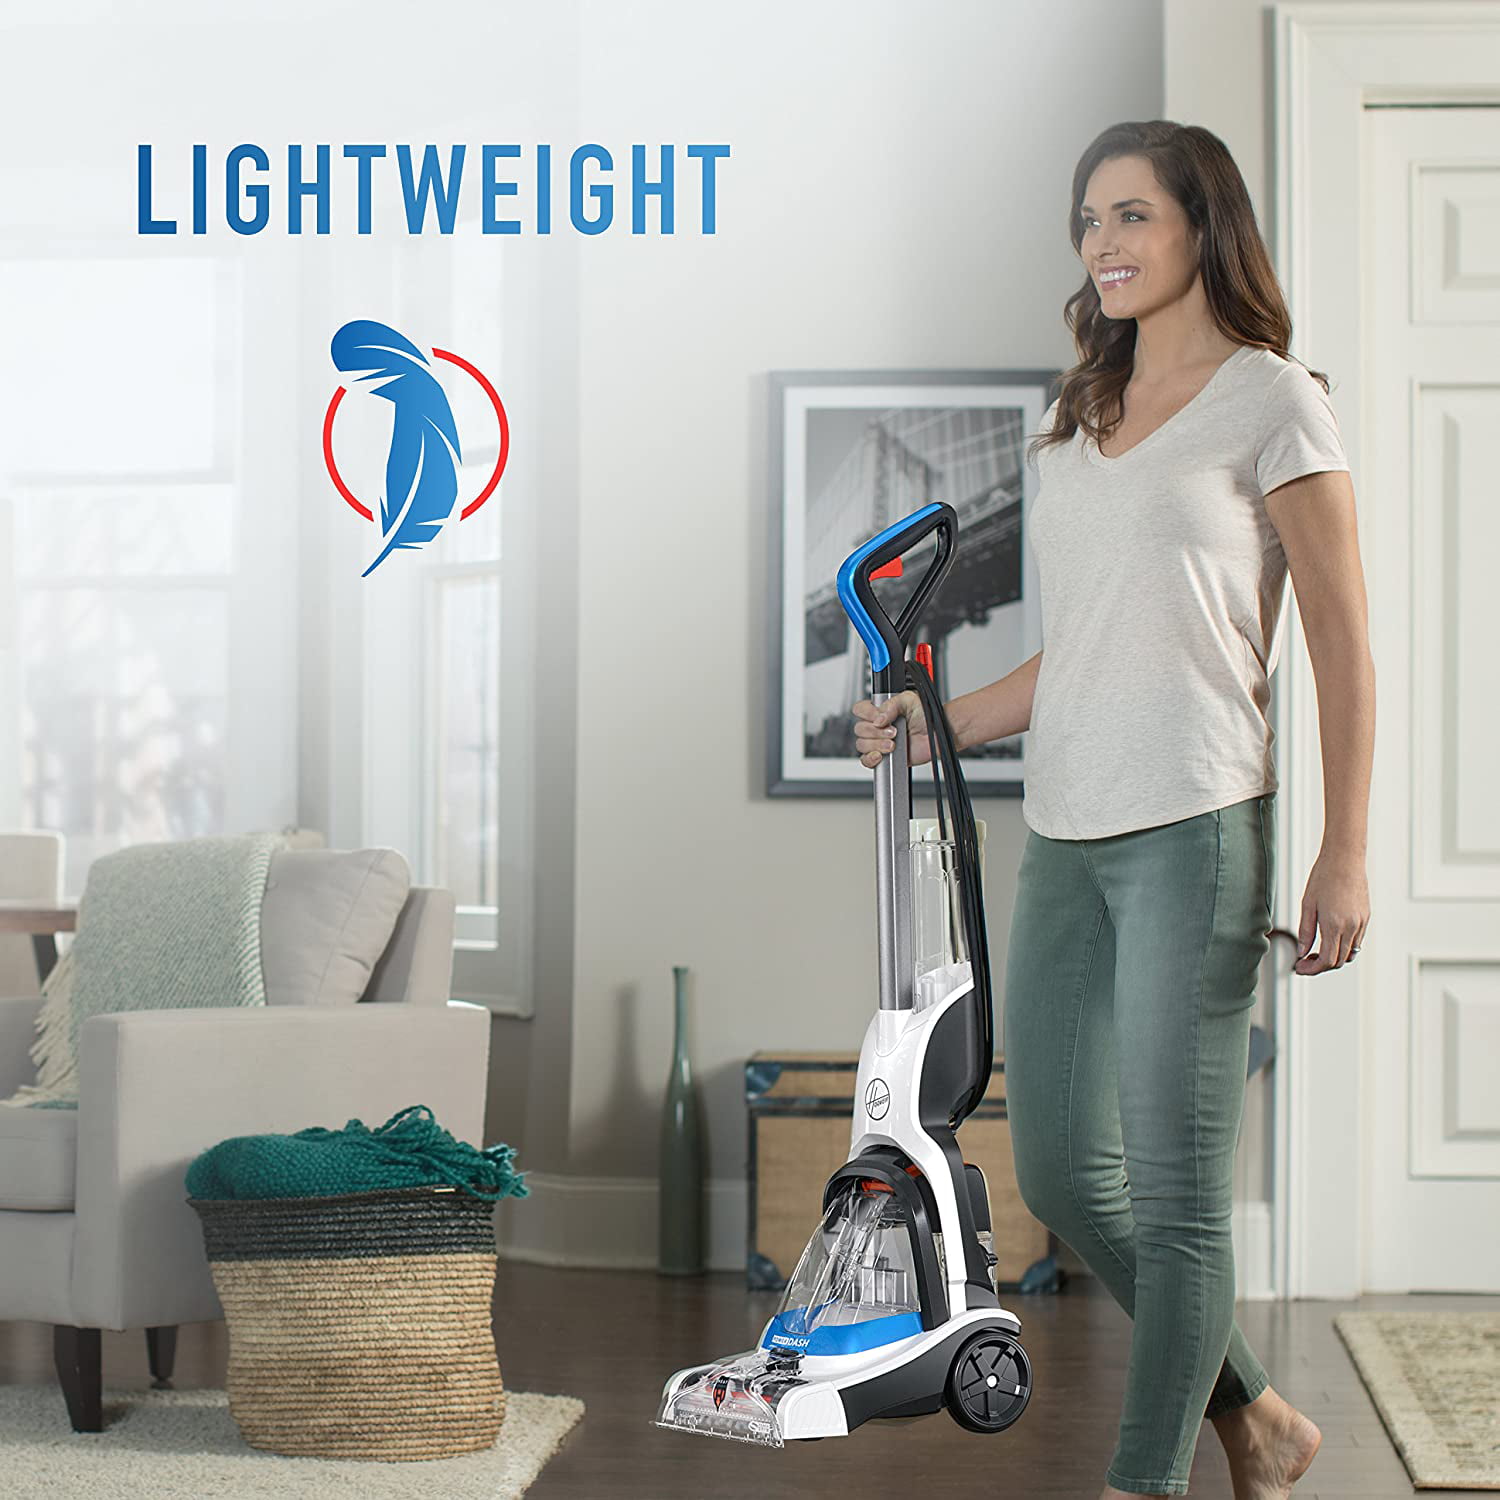 Best Buy: Hoover PowerDash Corded Upright Deep Cleaner White/Blue FH50700